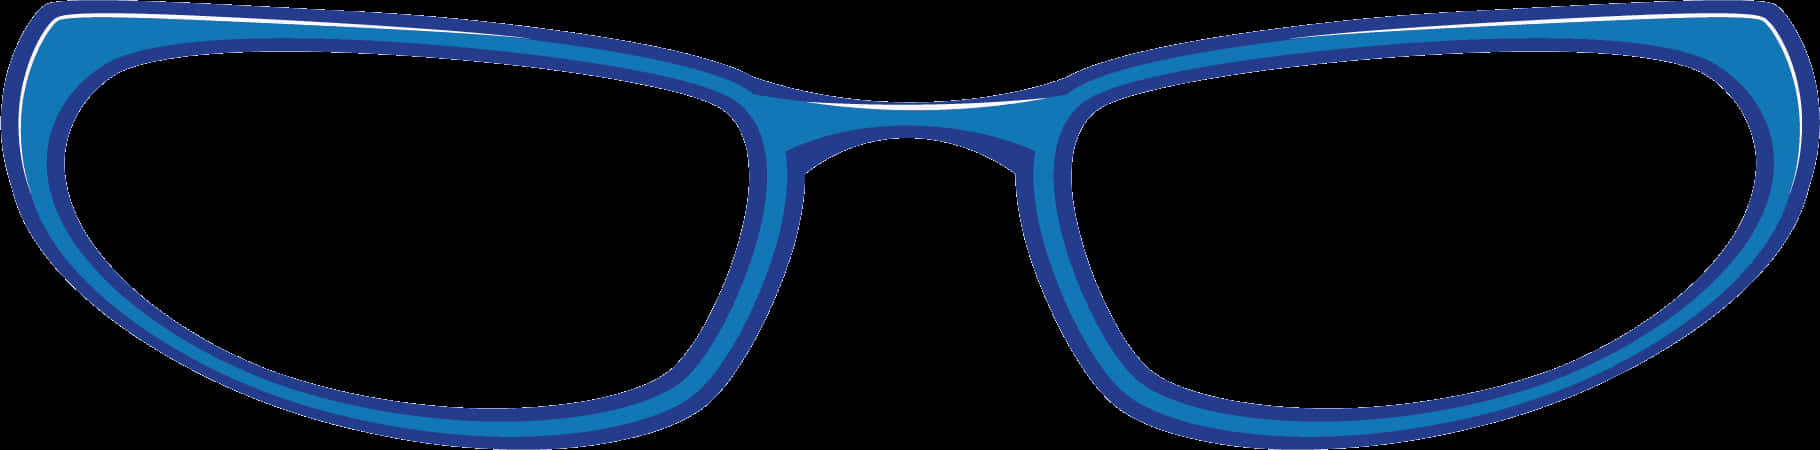 Round Panda Free Images - Eyeglasses Clipart, Hd Png Download